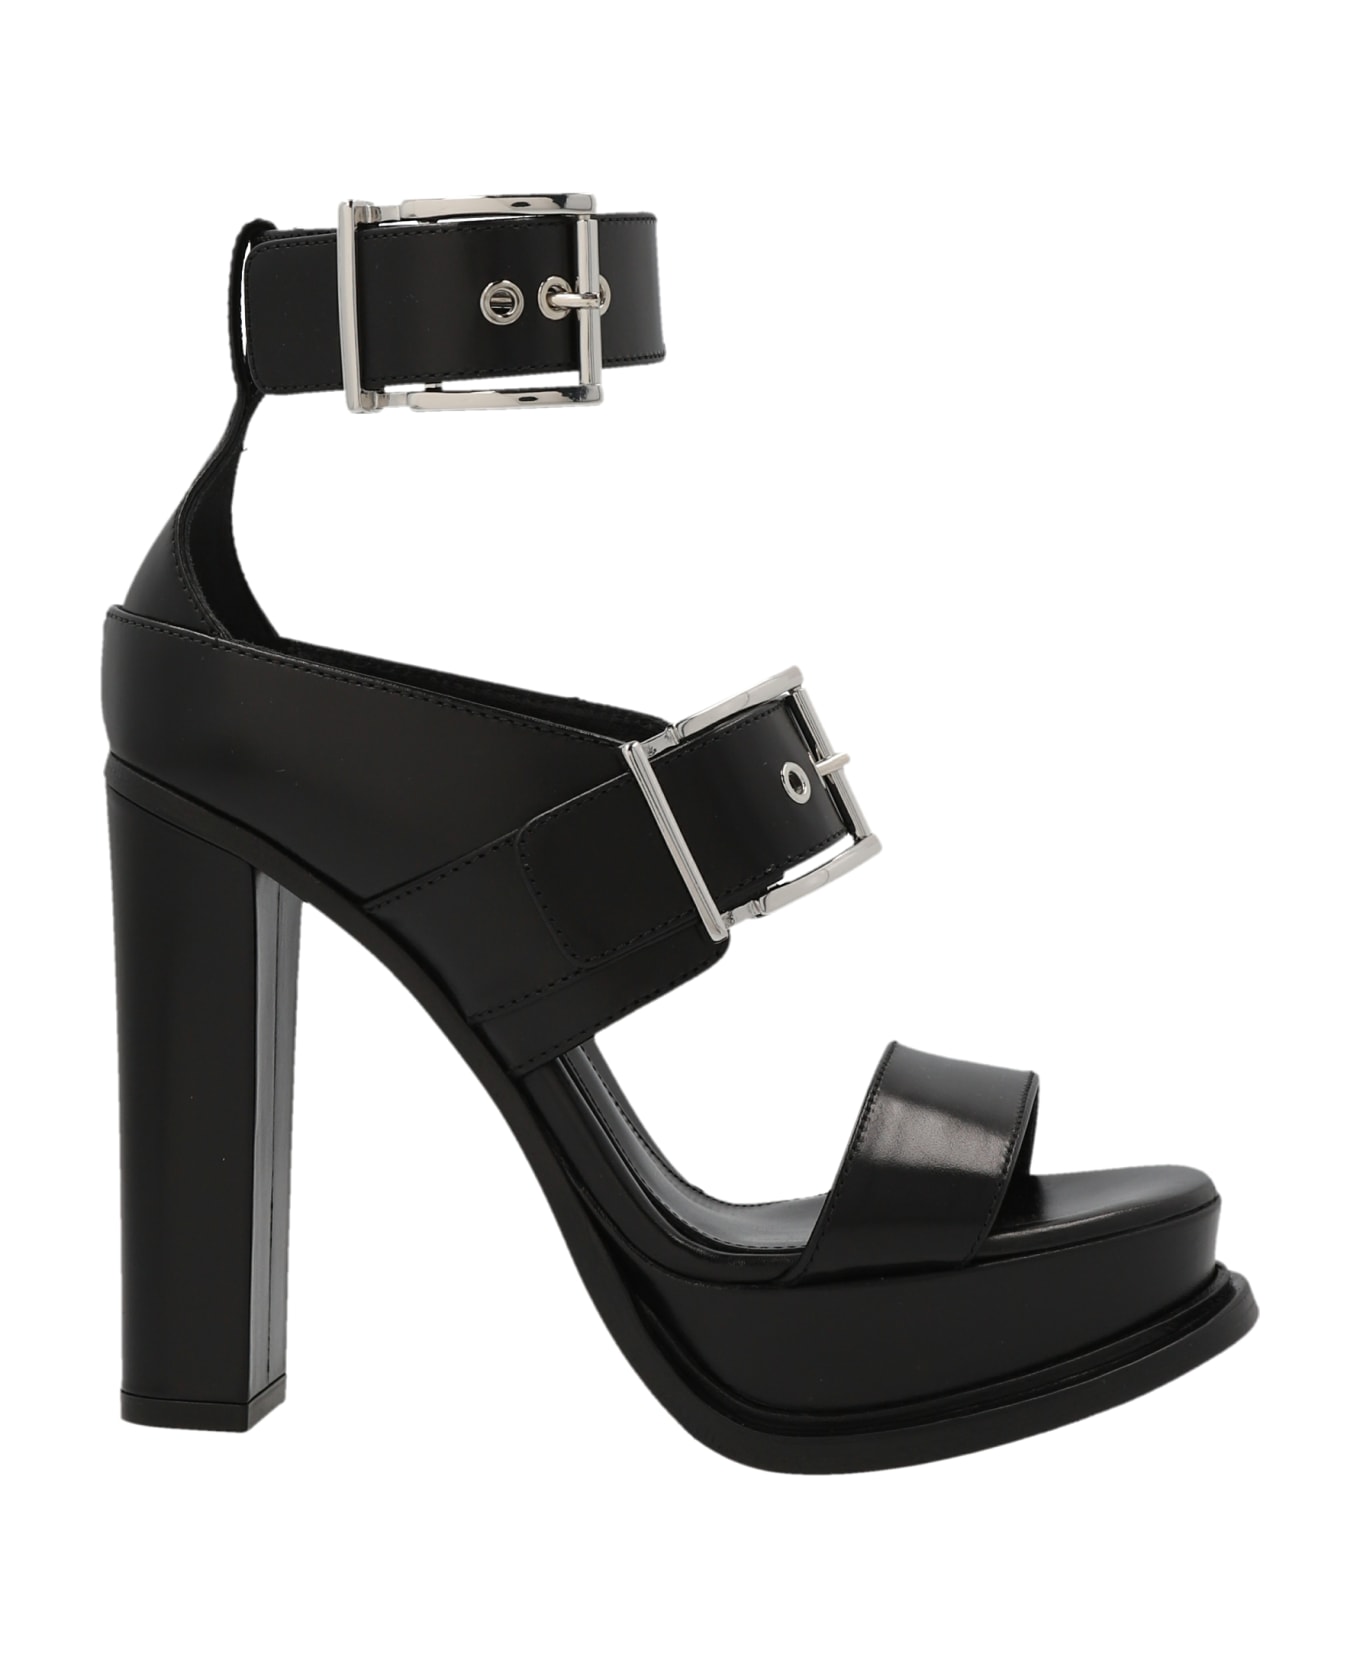 Alexander McQueen Platform Sandal With Buckles In Black And Silver - Black Silver サンダル